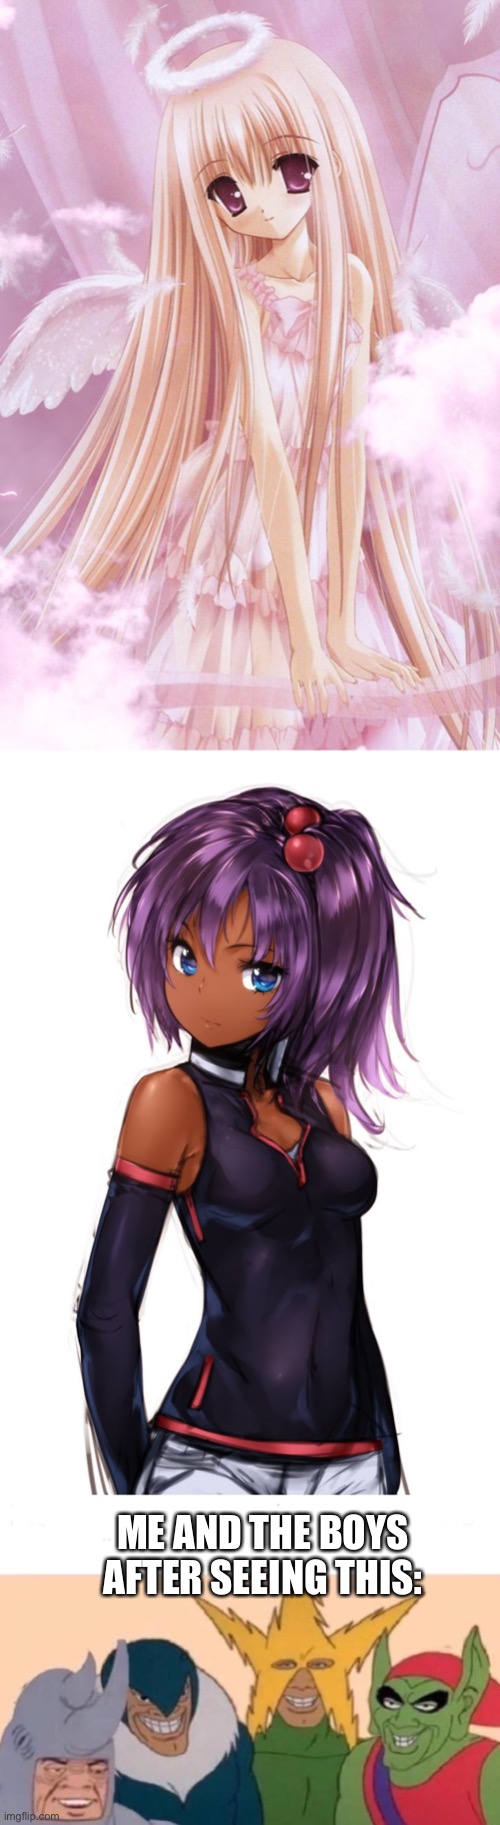 Anime Girl With Purple Hair And Blue Eyes